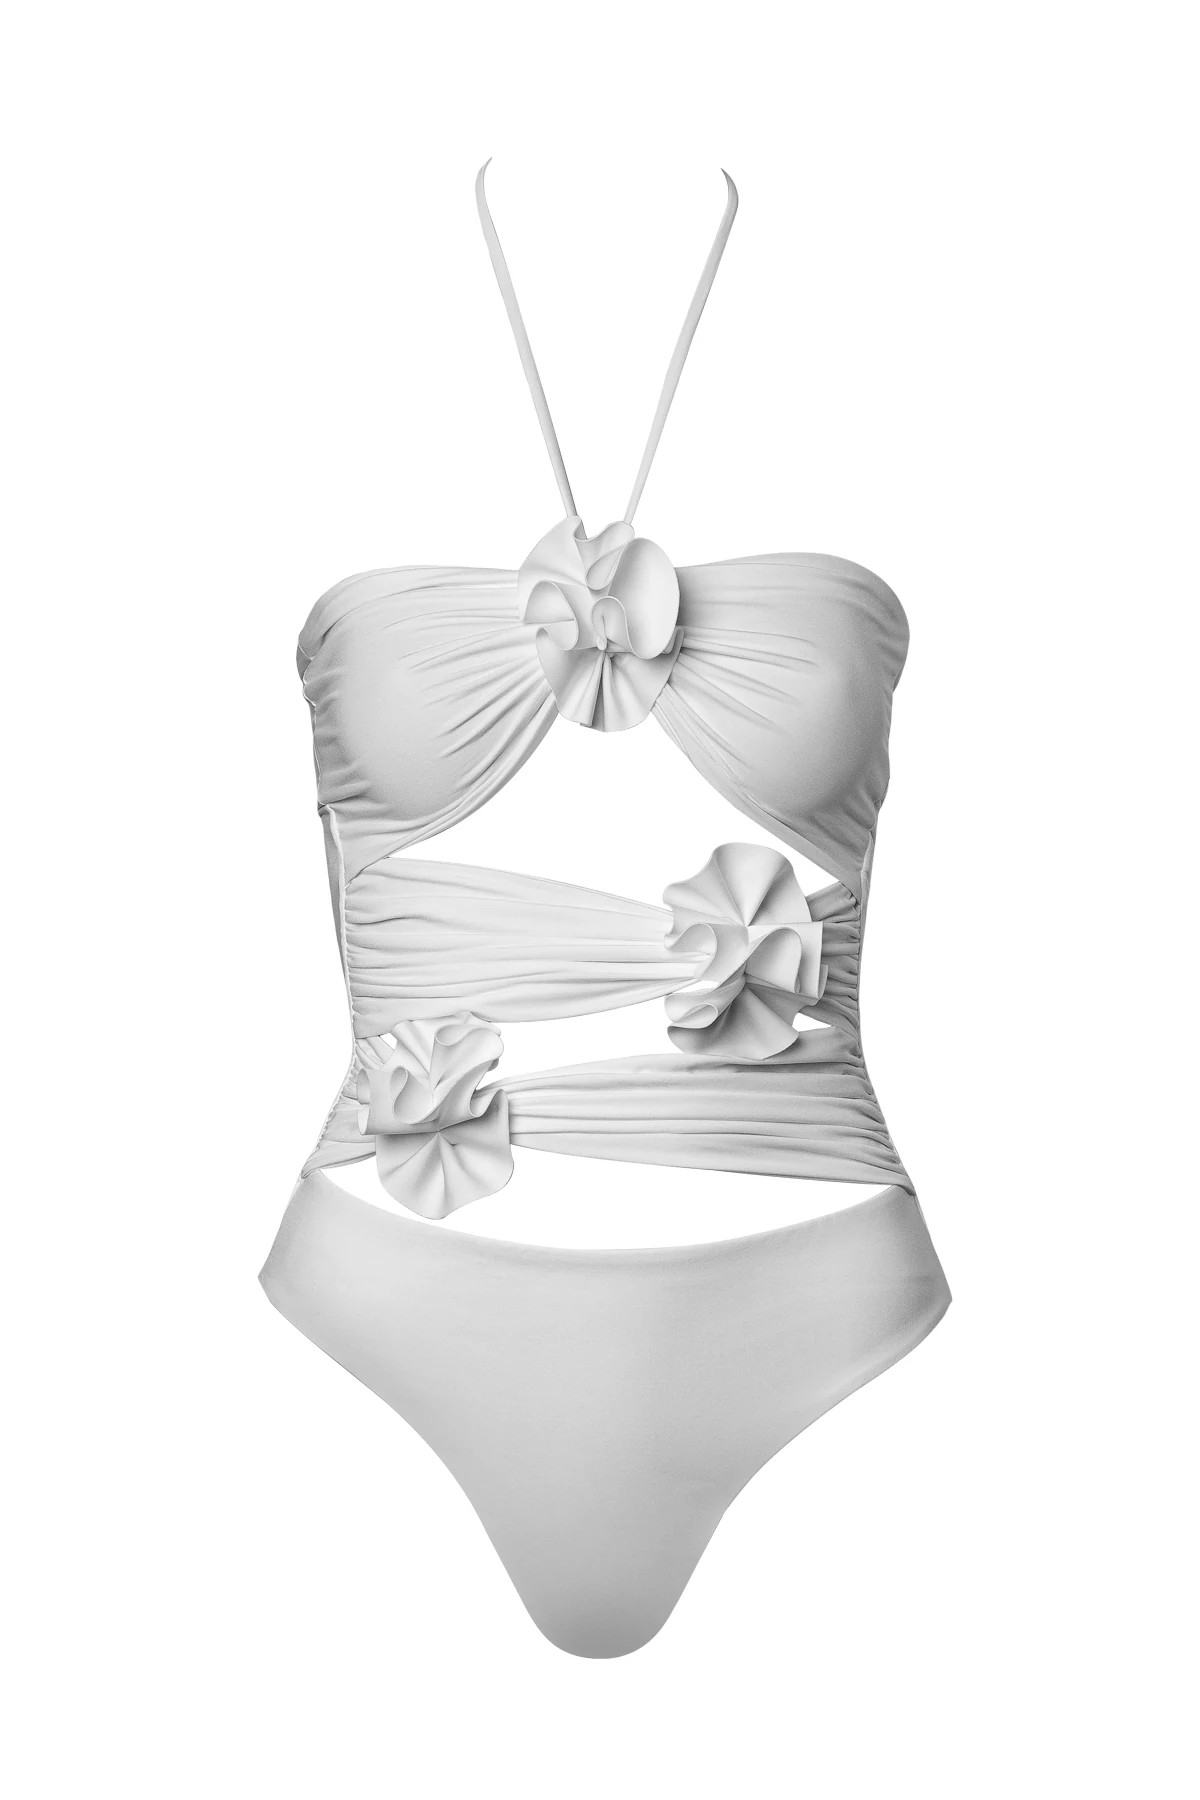 OFF WHITE Trinitaria One Piece Swimsuit image number 3